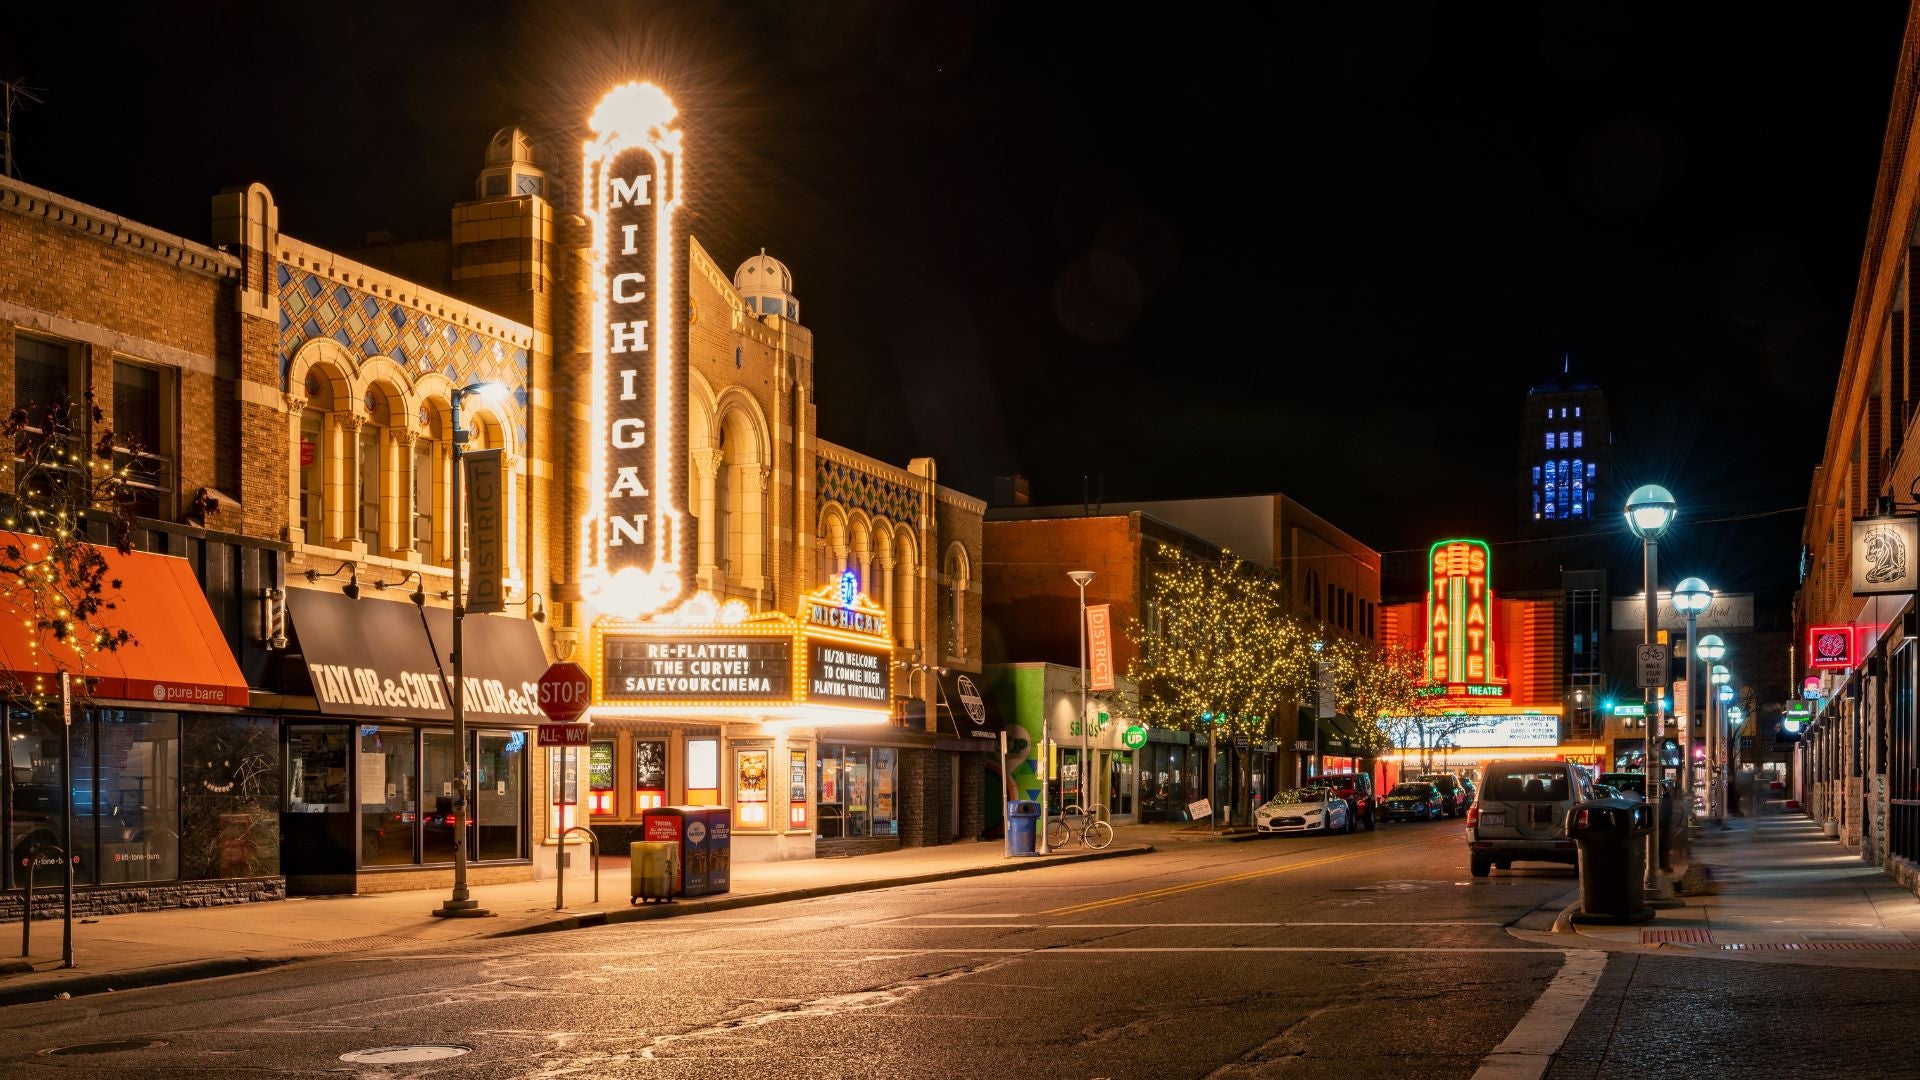 Michigan Theater in Ann Arbor at night. - History By Mail